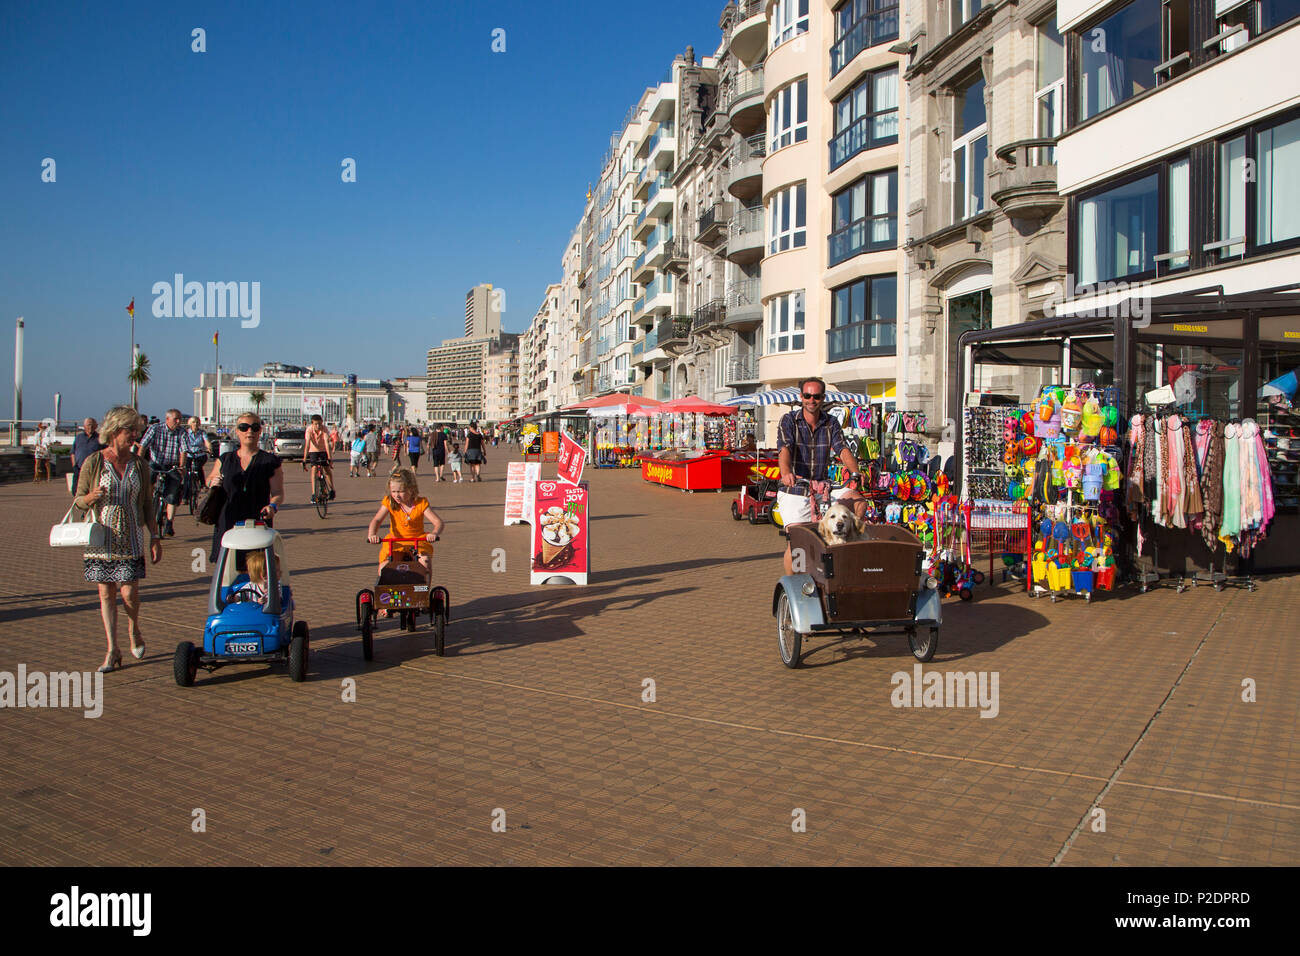 Man on bicycle with cart and Golden Retriever dog in it on the beach promenade, Ostend, Flanders, Flemish Region, Belgium Stock Photo